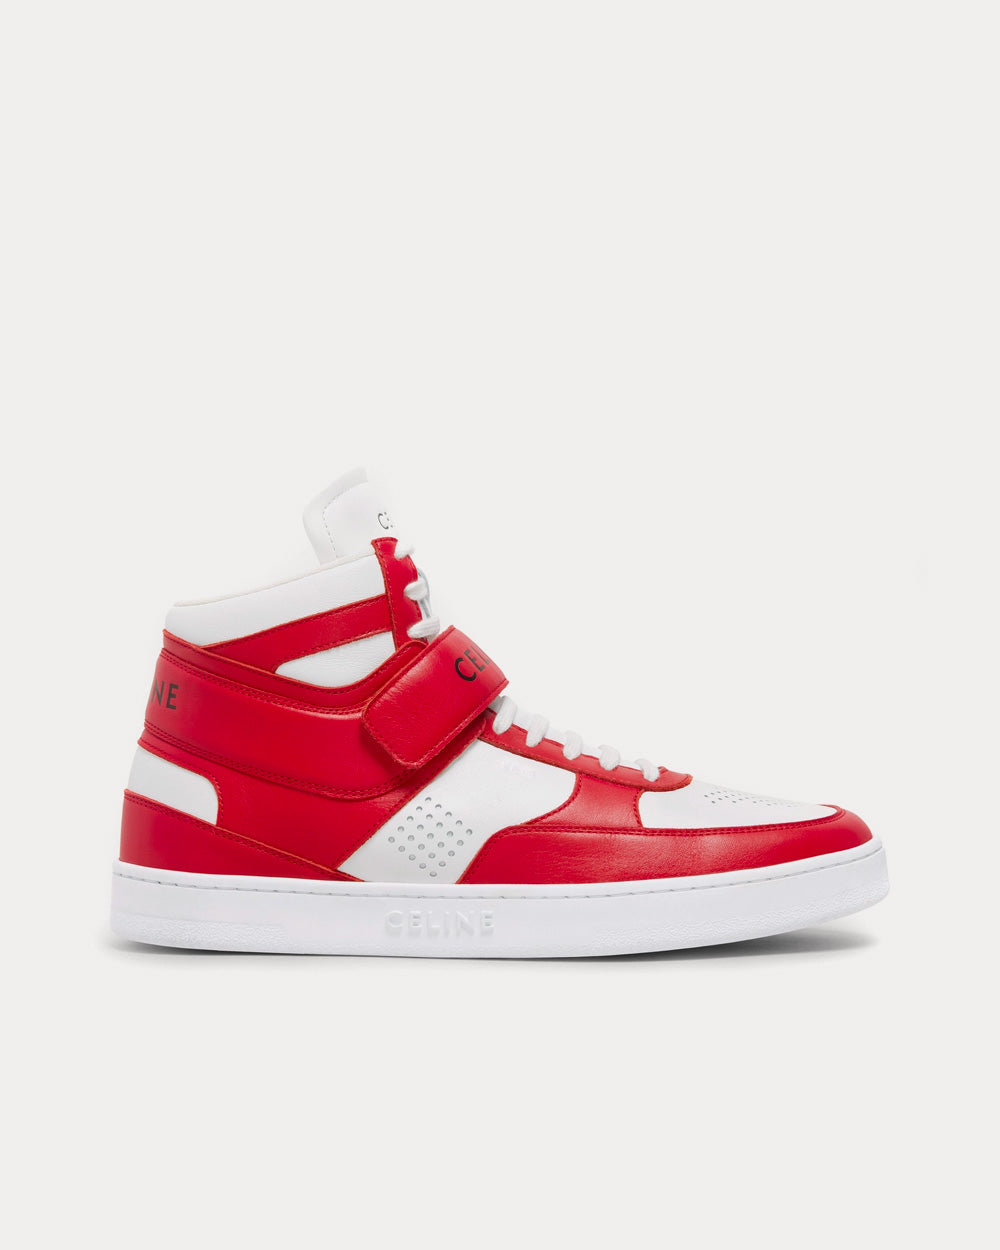 Celine - CT-03 Scratch with Calfskin Red / Optic White High Top Sneakers